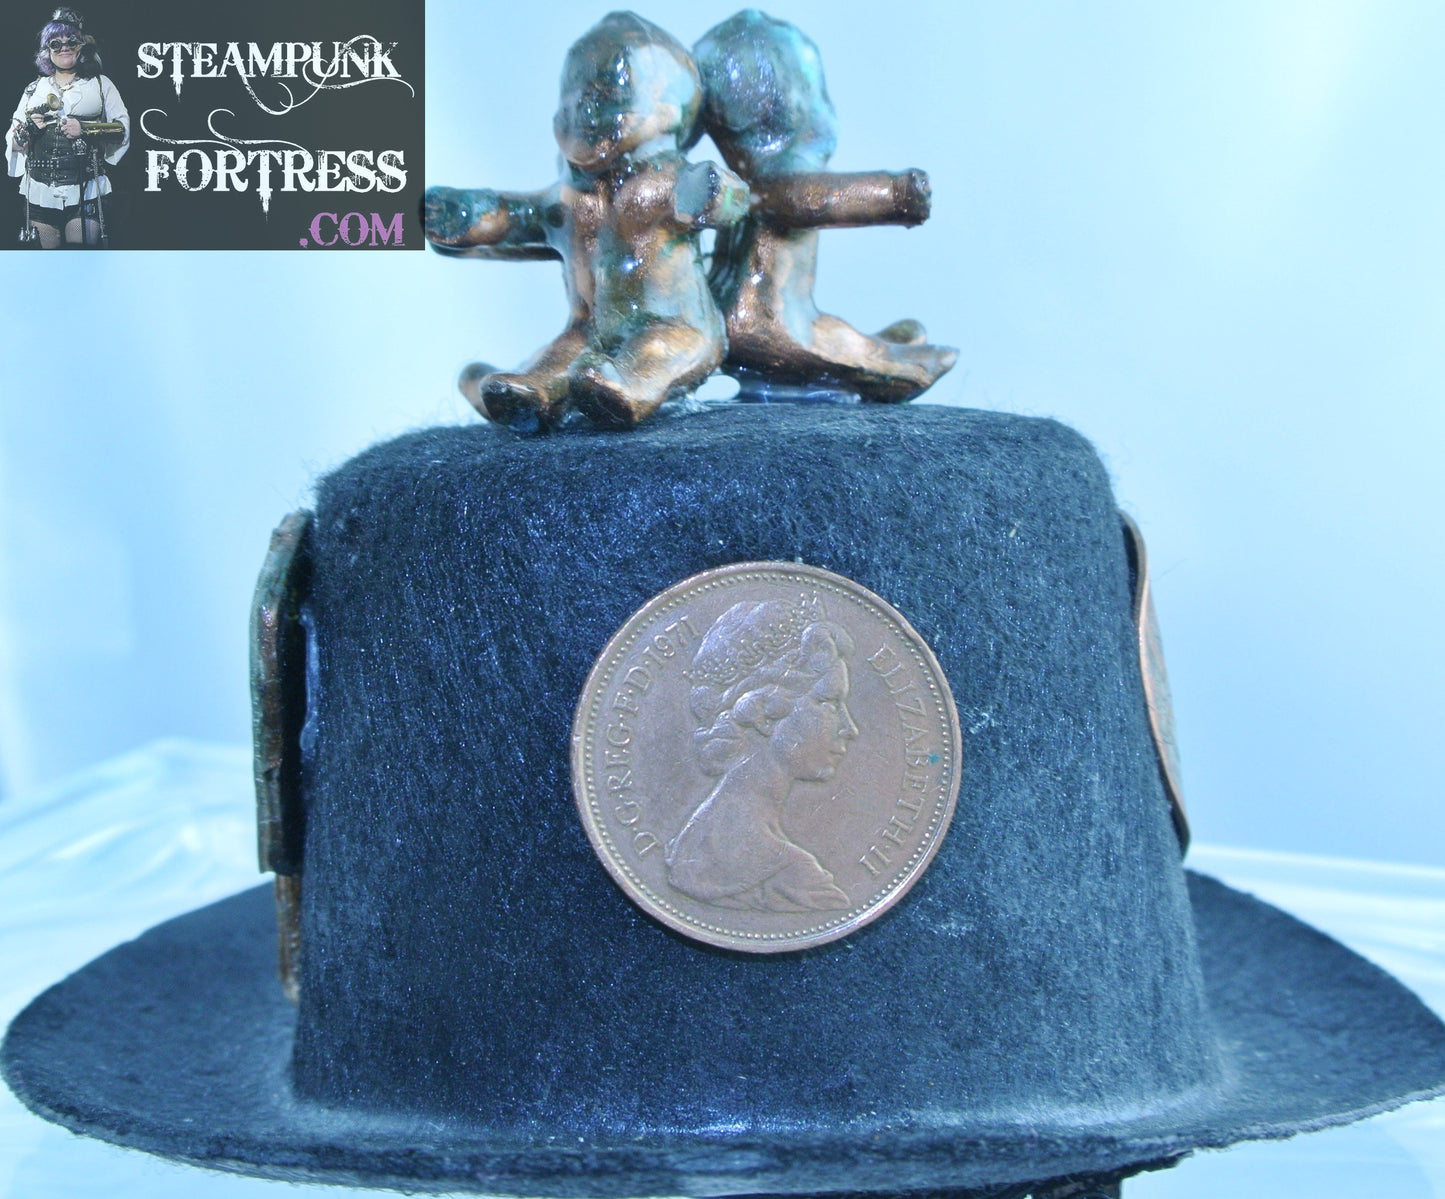 BLACK COPPER FAN COIN FRONT KANGAROO CHARM COPPER DIPPED KEY QUEEN ELIZABETH COIN 3 COPPER DIPPED BABIES TOP XS EXTRA SMALL MINI TOP HAT STARR WILDE STEAMPUNK FORTRESS